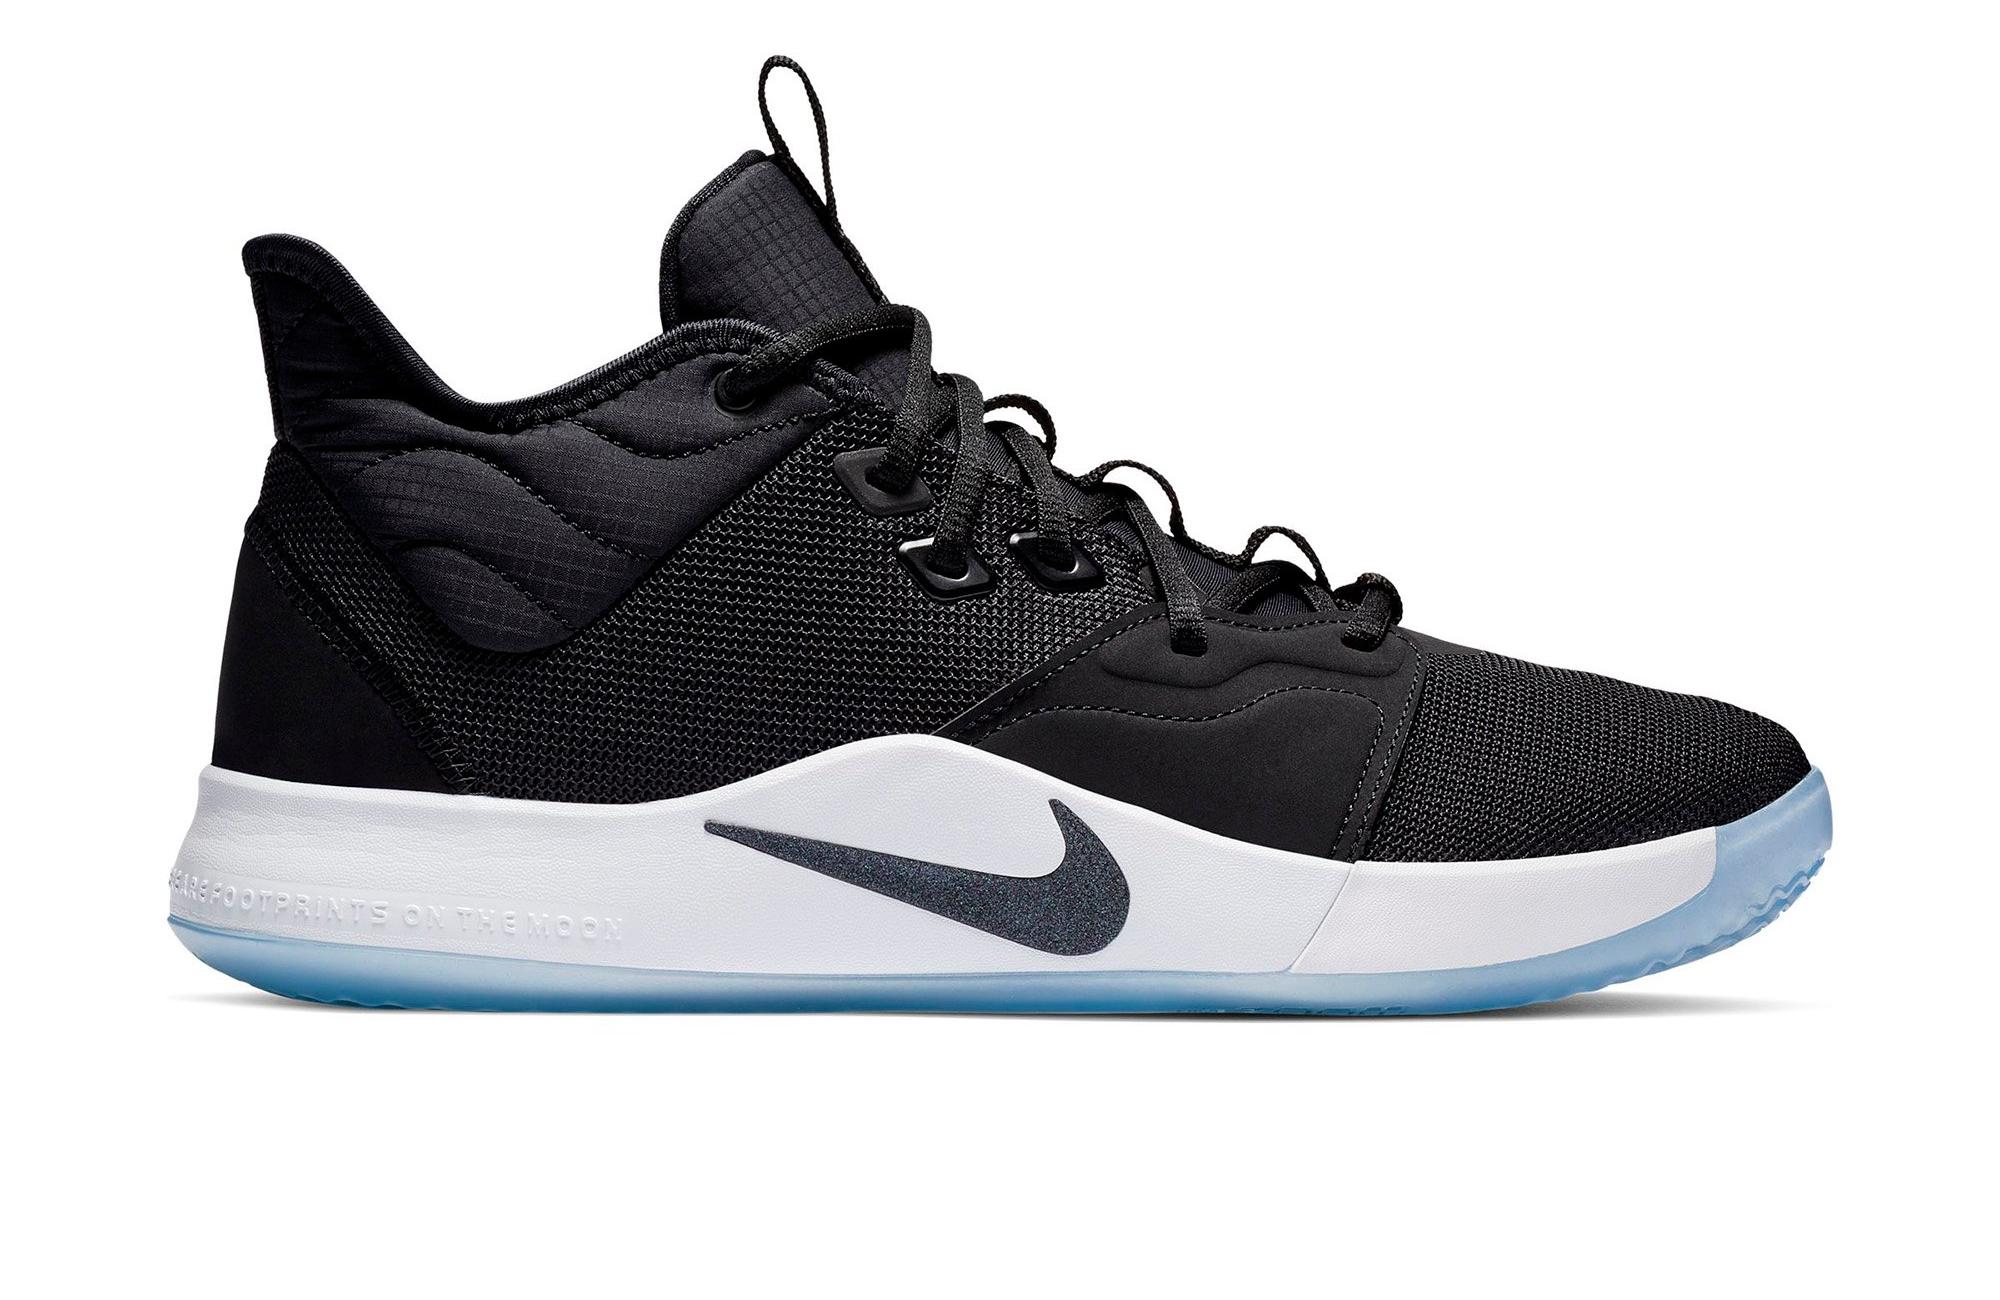 Sneakers Release – Nike PG 3 “Black/White” Basketball Shoes